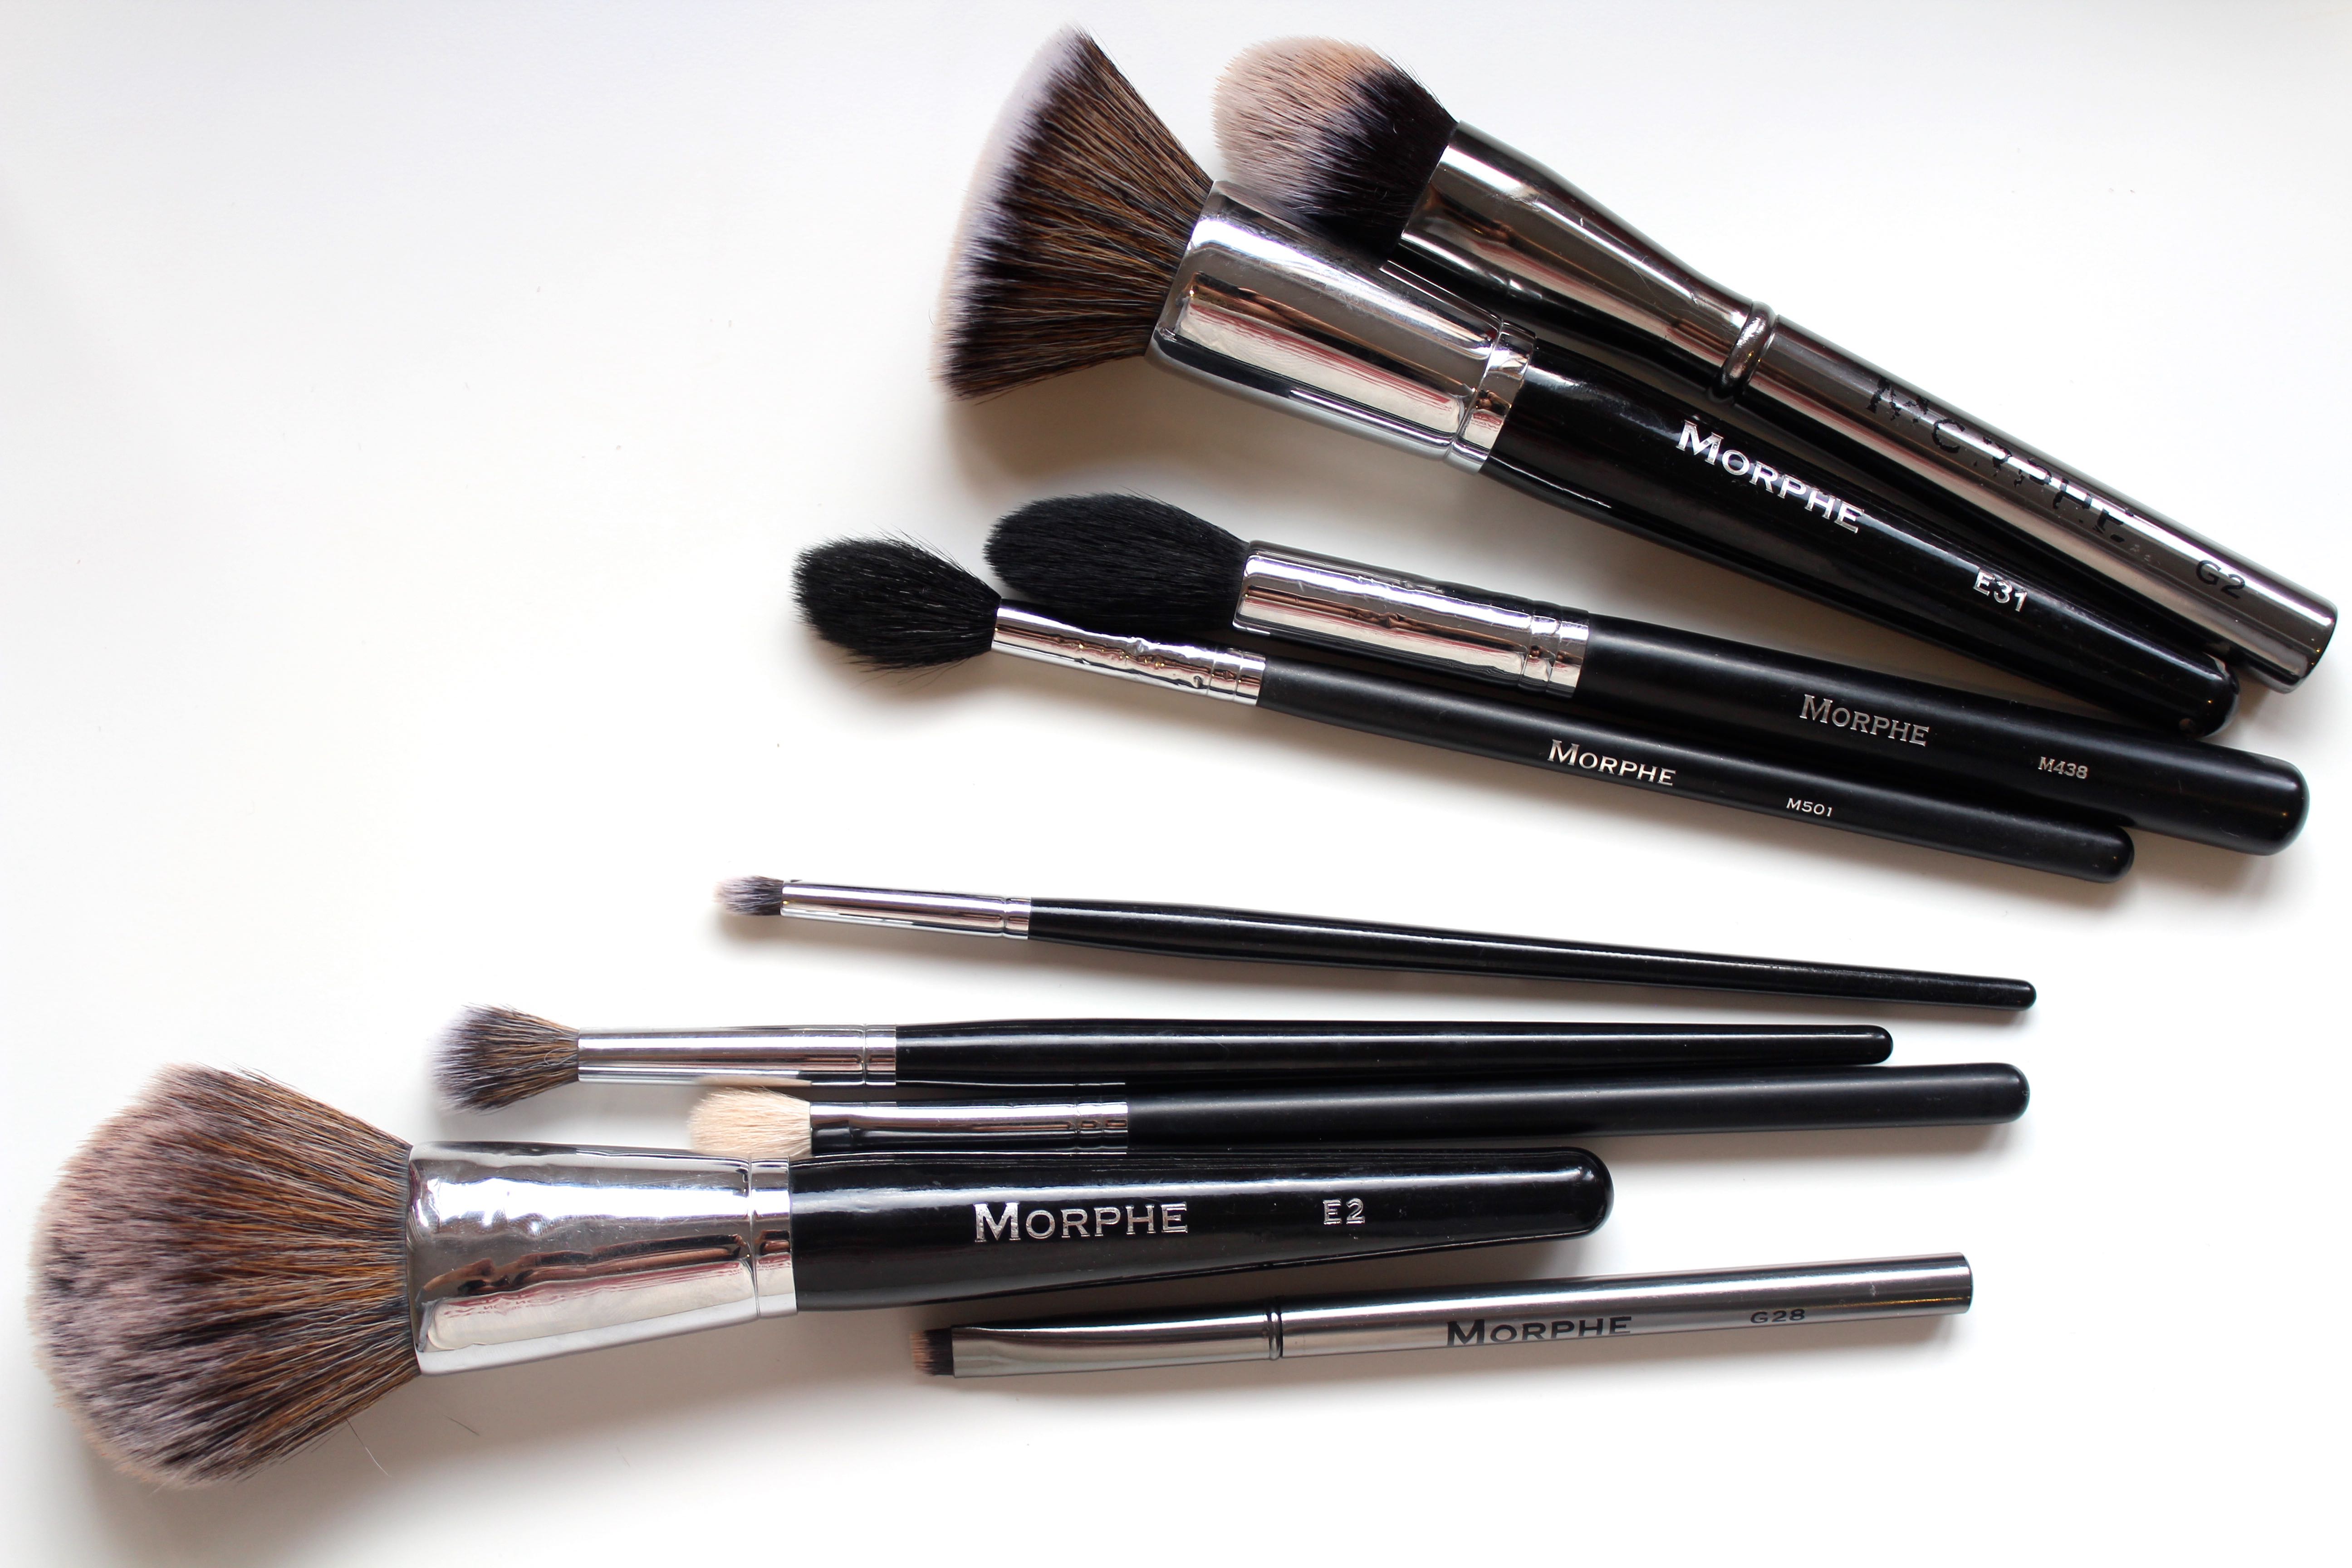 My Favourite Morphe Brushes - Face Made Up - Beauty Product Reviews, Makeup  Tutorial Videos  Lifestyle